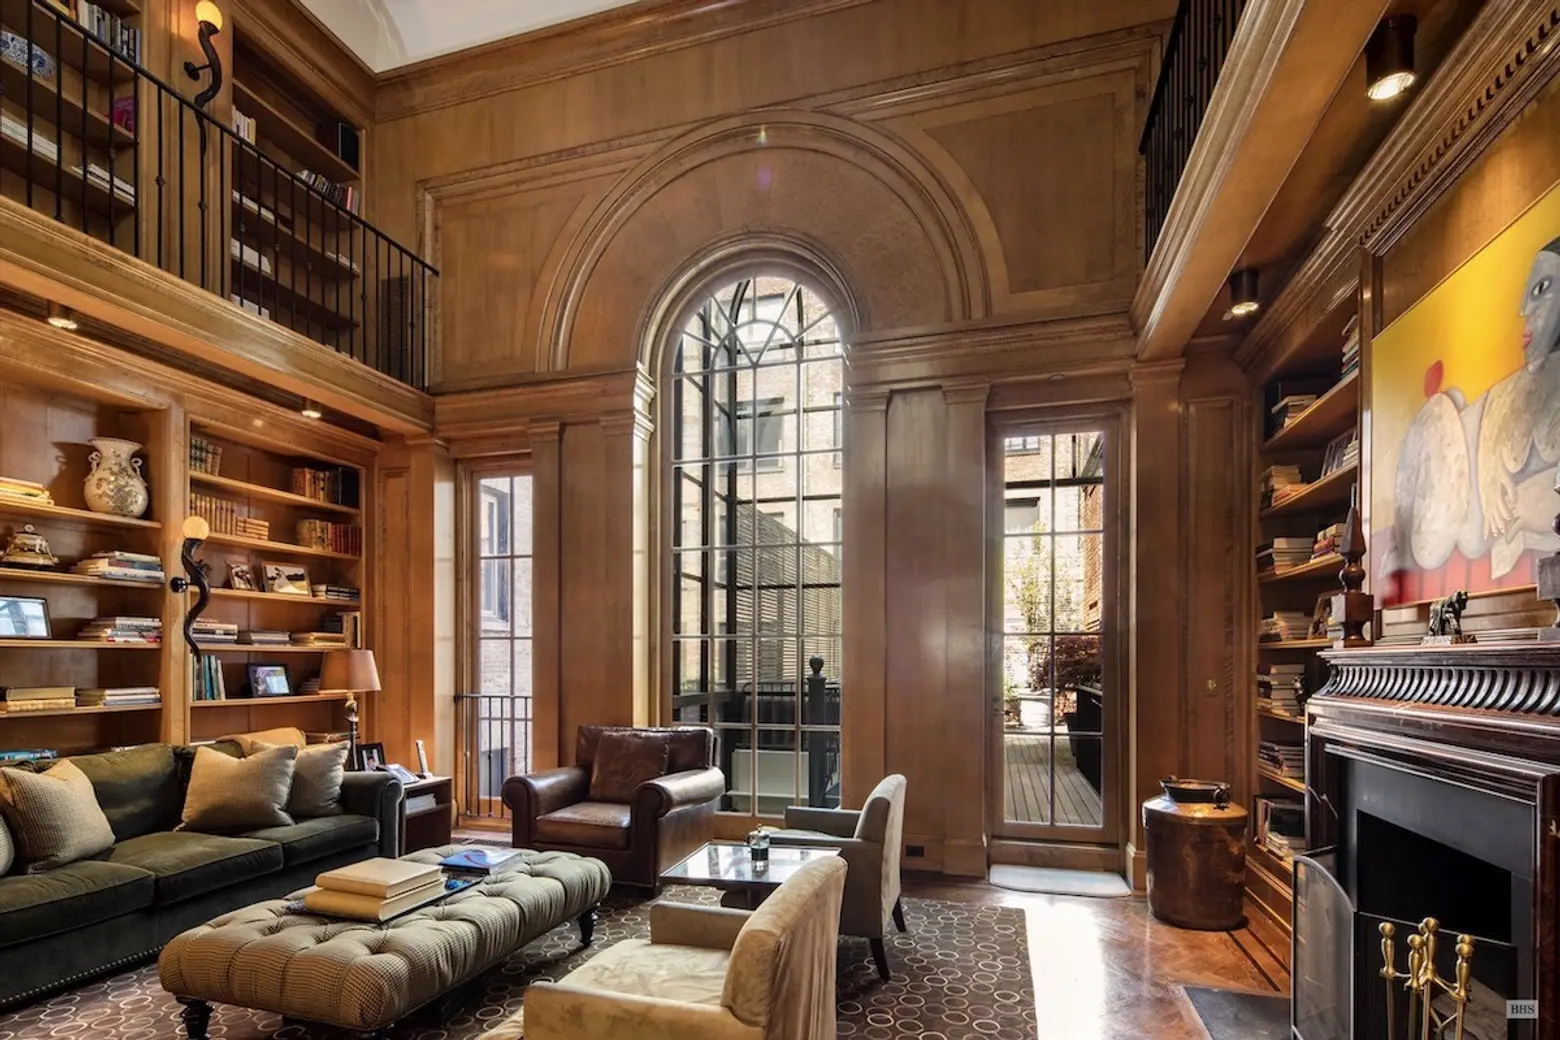 On the market since 2009, $36.5M Upper East Side mansion has just about everything but a buyer